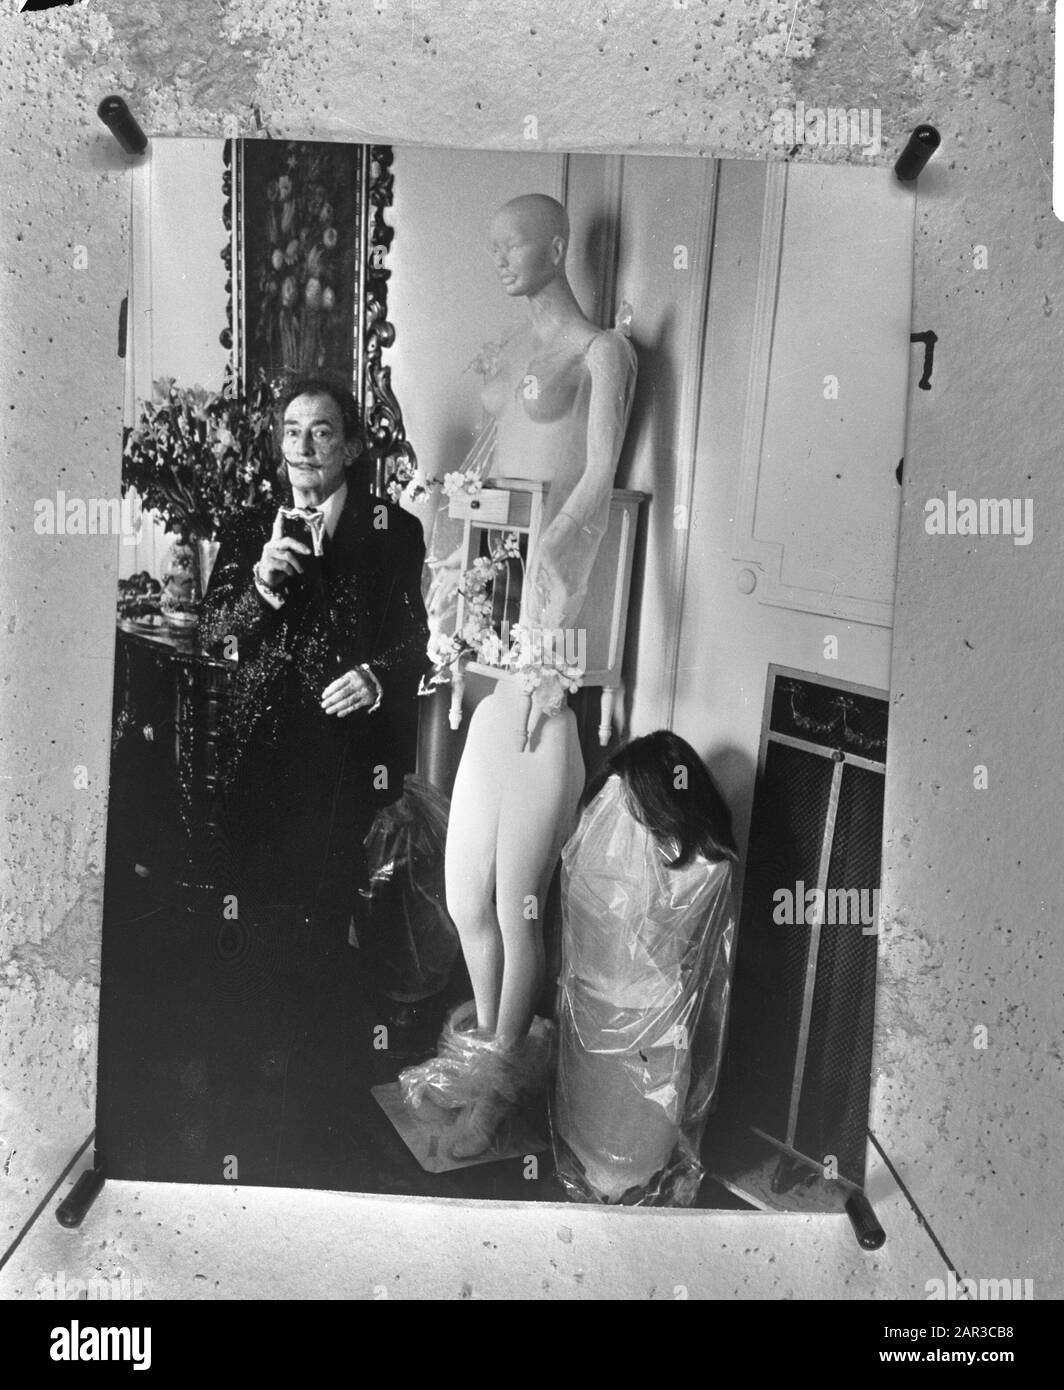 Salvador Dali in Barcelona with bizarre image of woman, for Dalimuseum in Figueras Date: May 29, 1974 Location: Barcelona Keywords: images, women Stock Photo